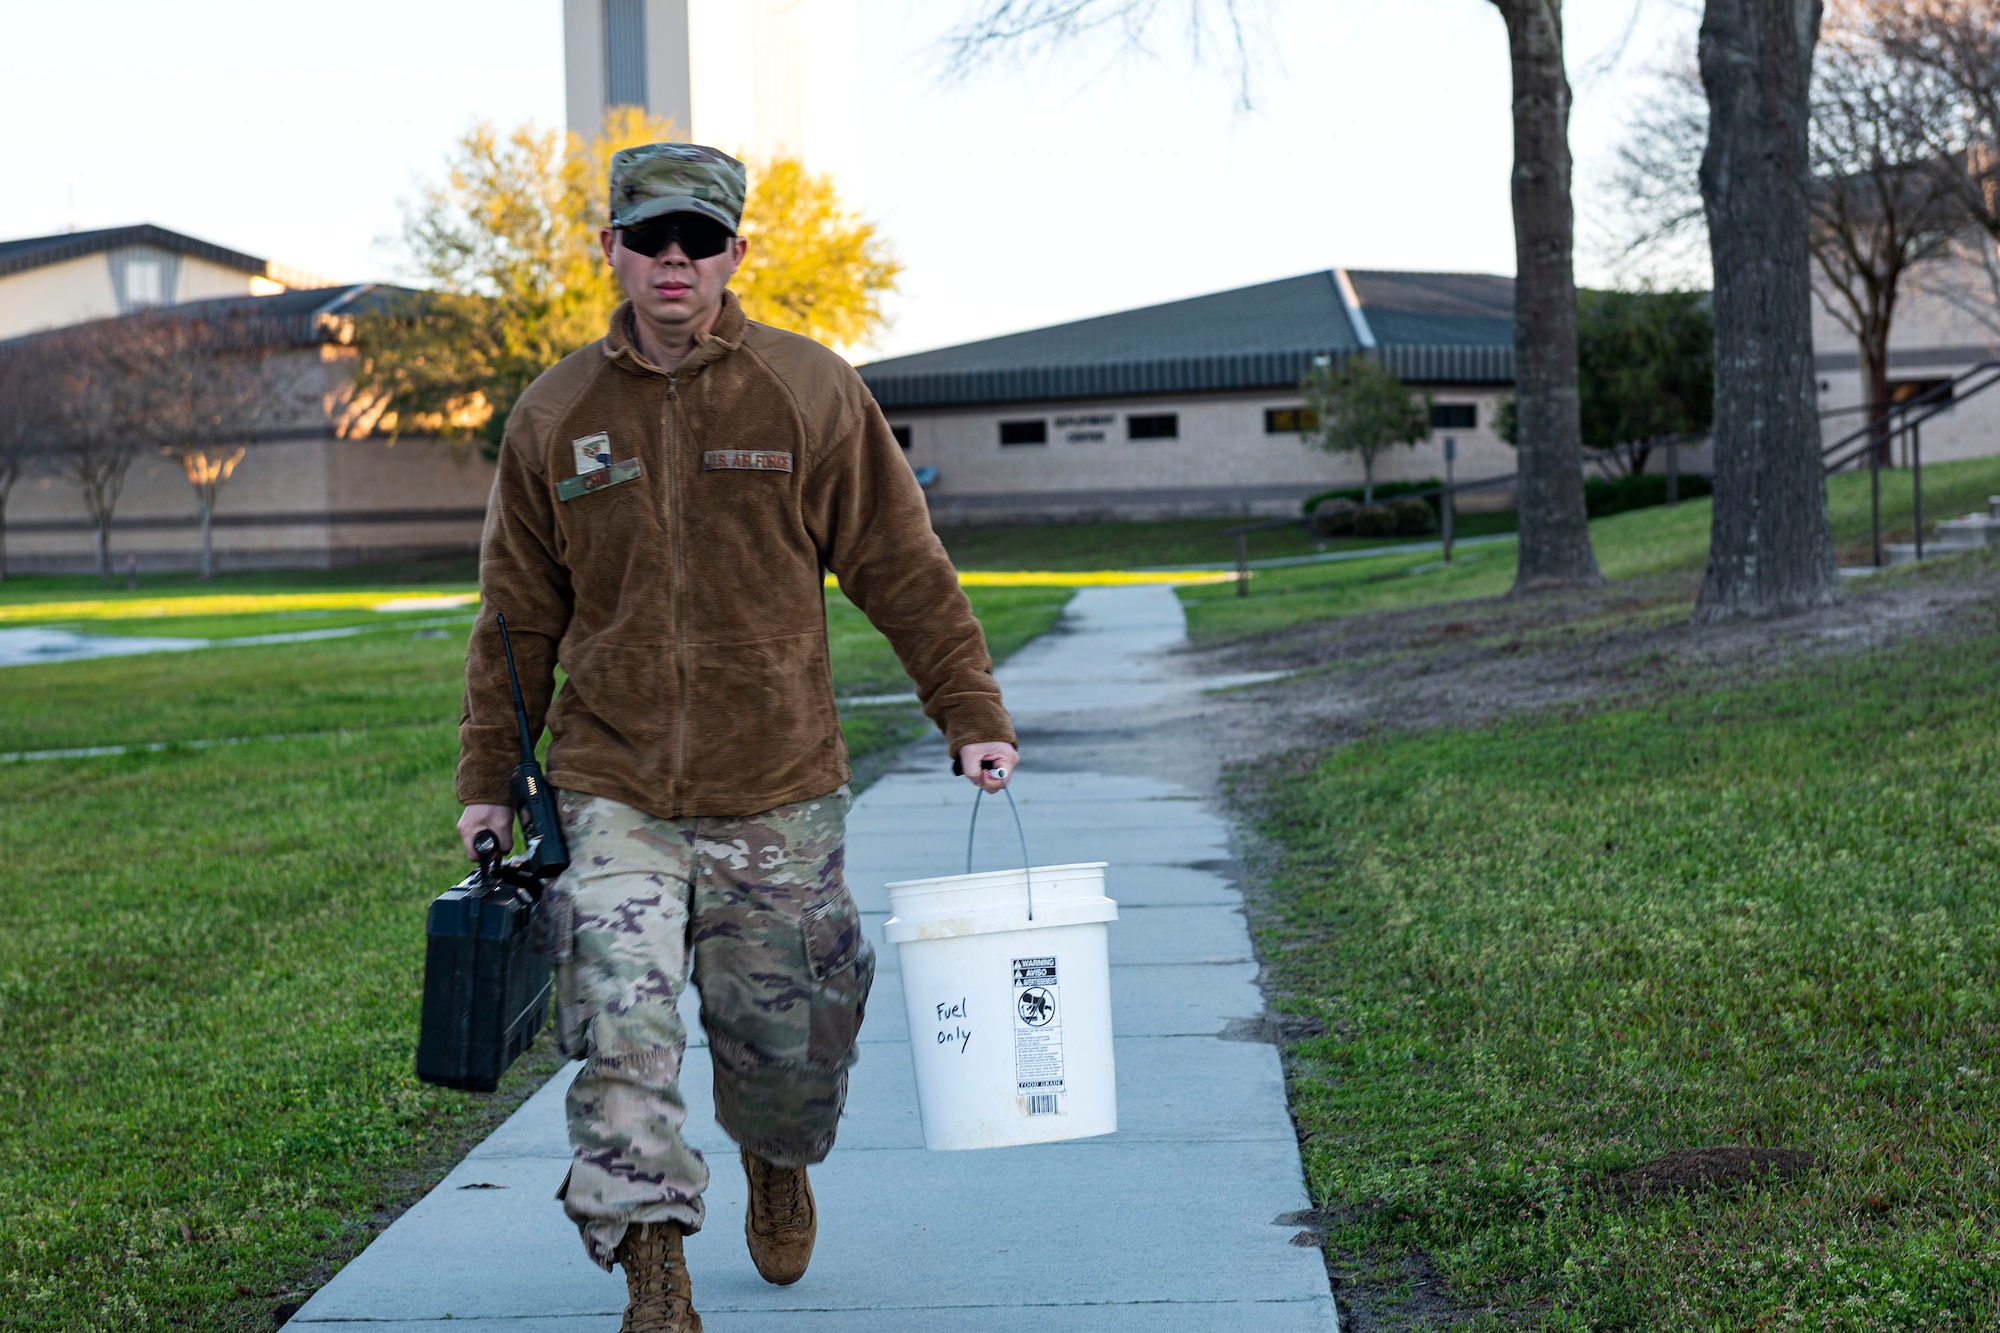 Photo of Airman walking to a job site.